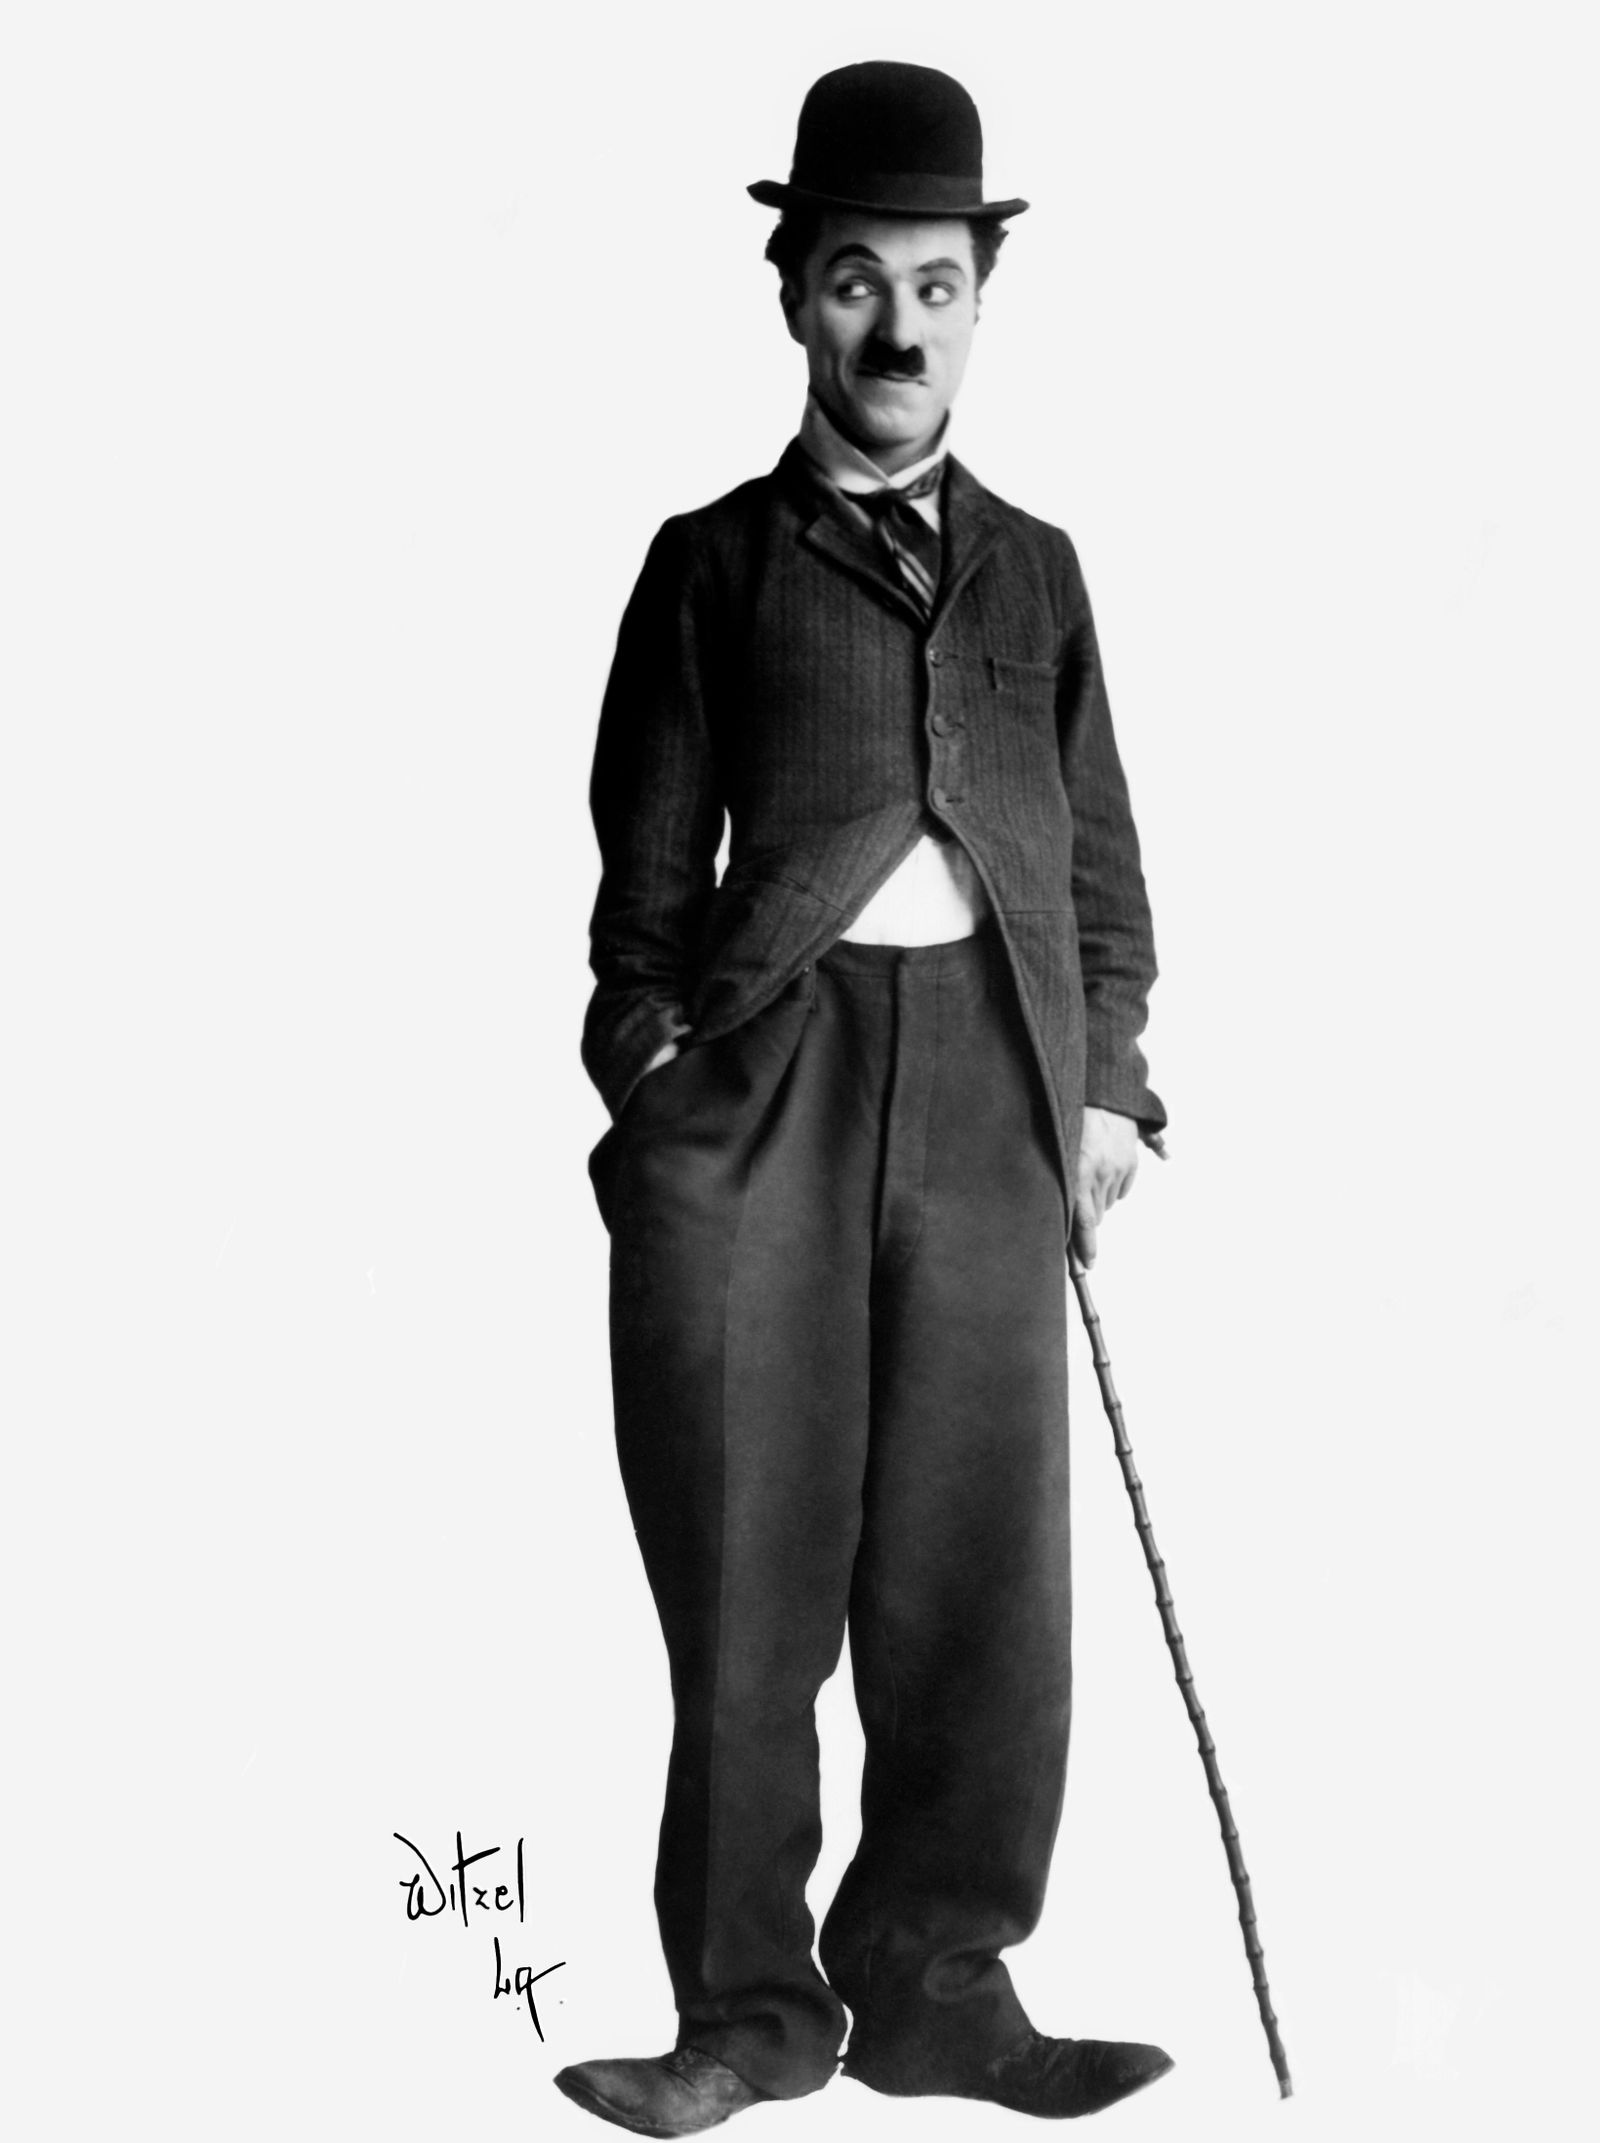 Grave Robbers Once Held Charlie Chaplin's Body For Ransom | Smart News| Smithsonian Magazine